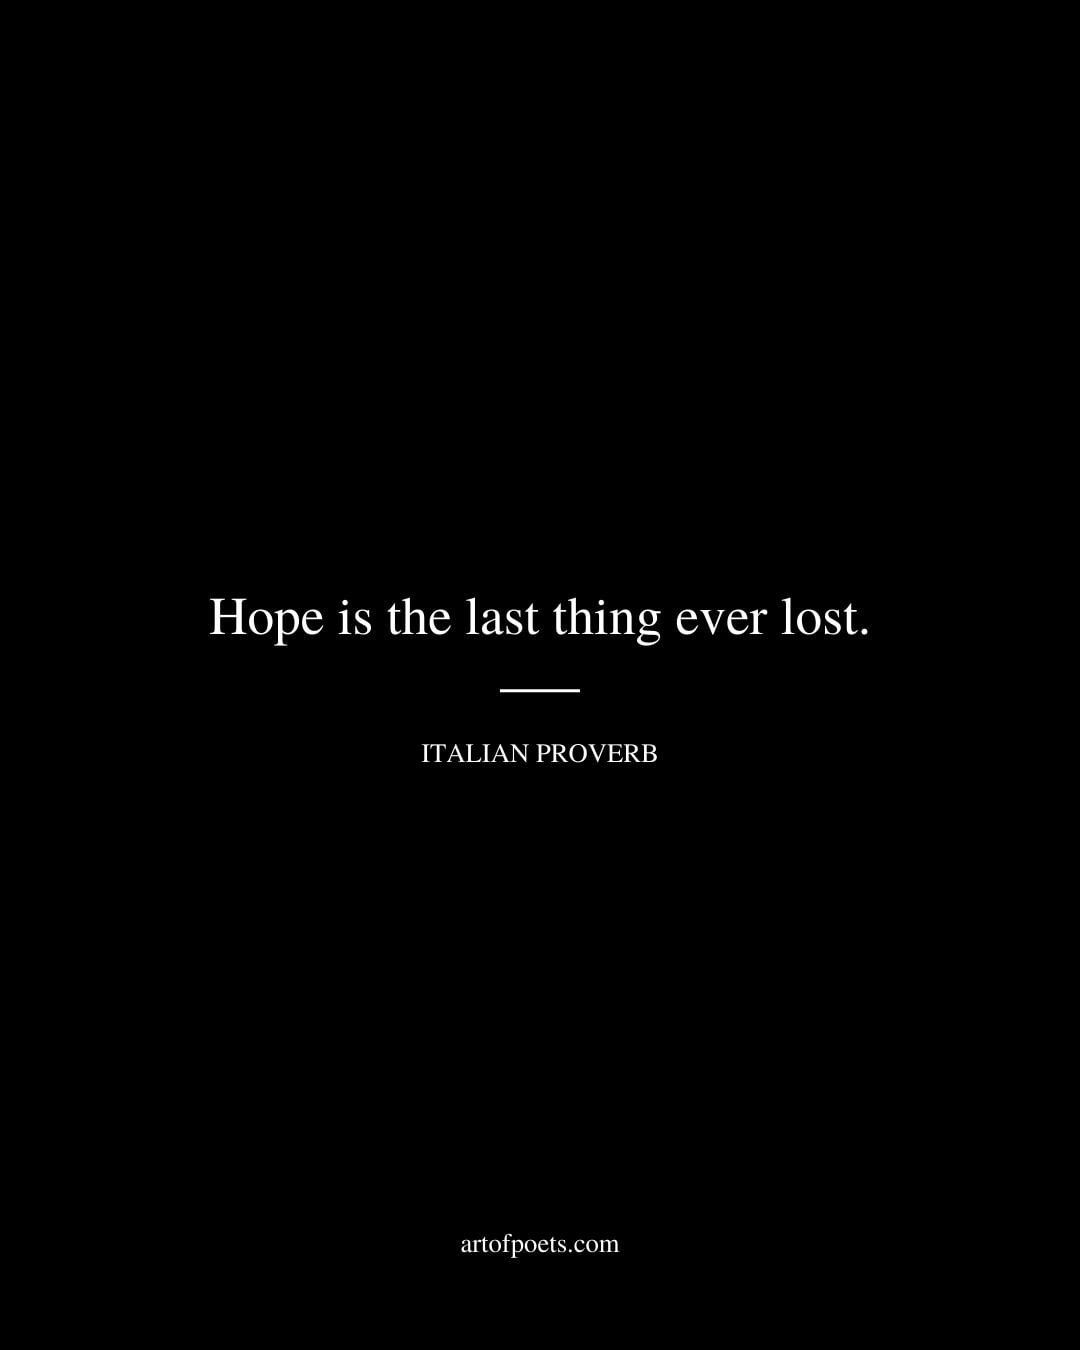 Hope is the last thing ever lost. Italian proverb